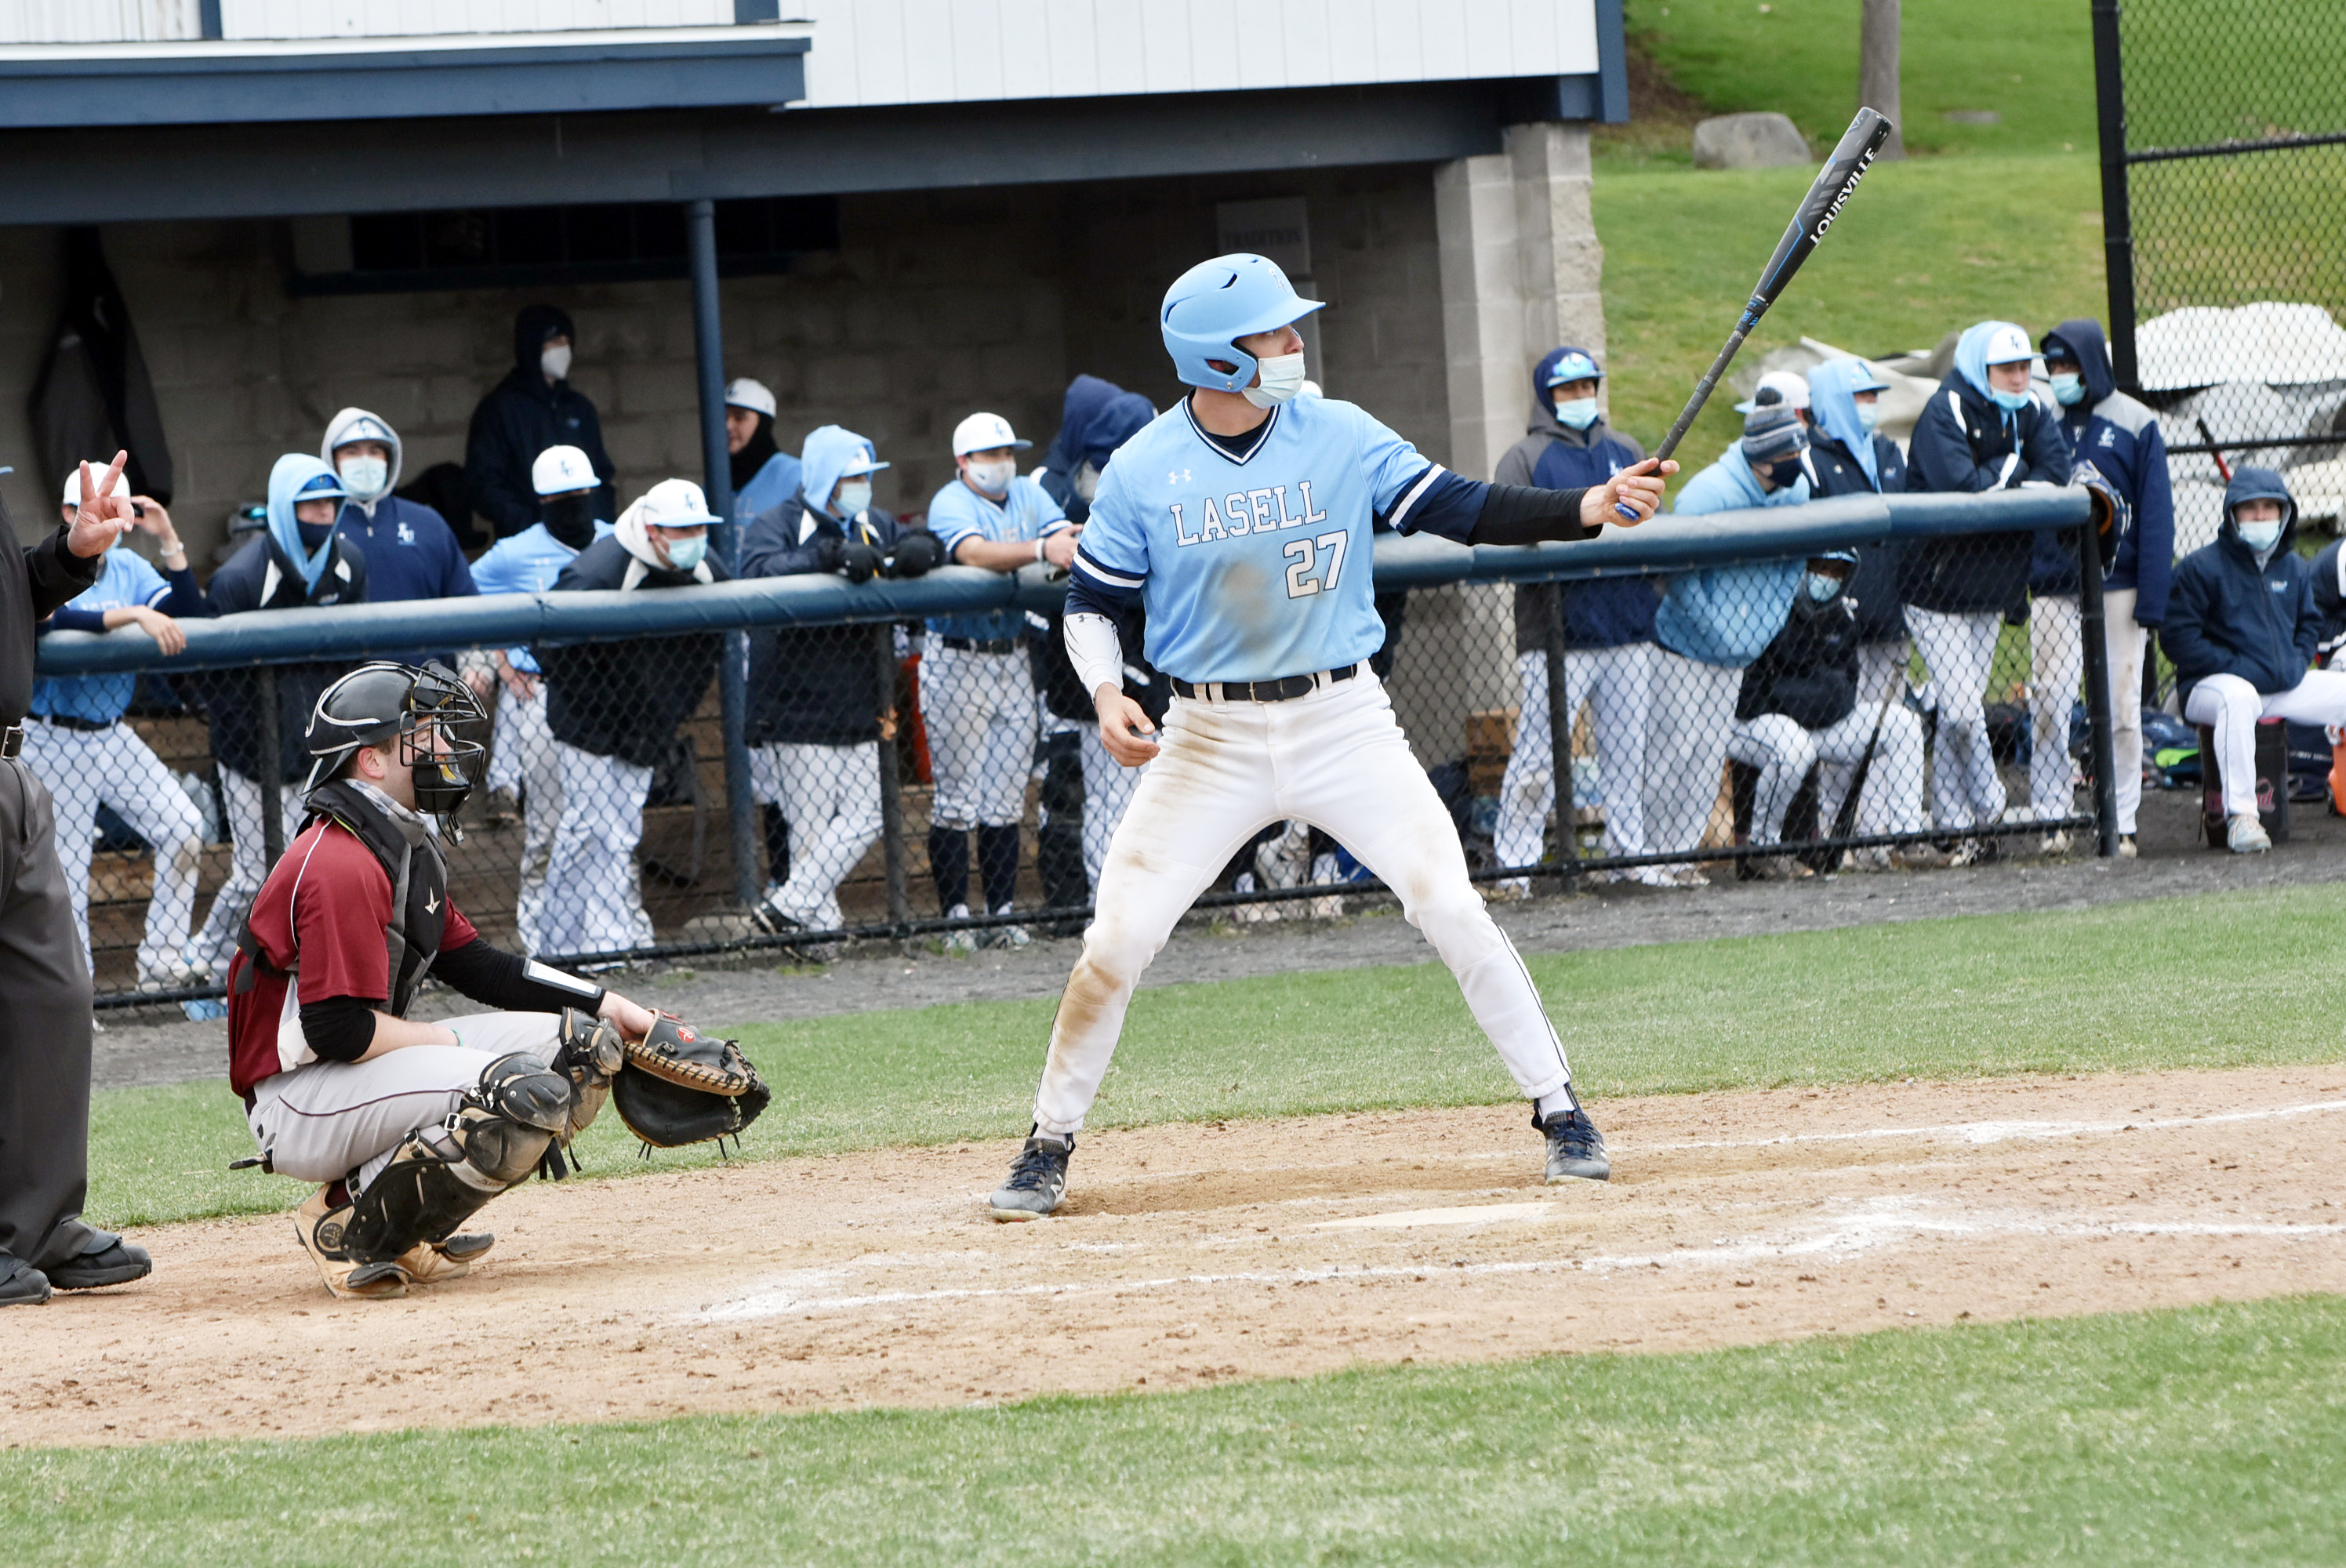 BSB: Lasell splits conference rematch against Albertus Magnus